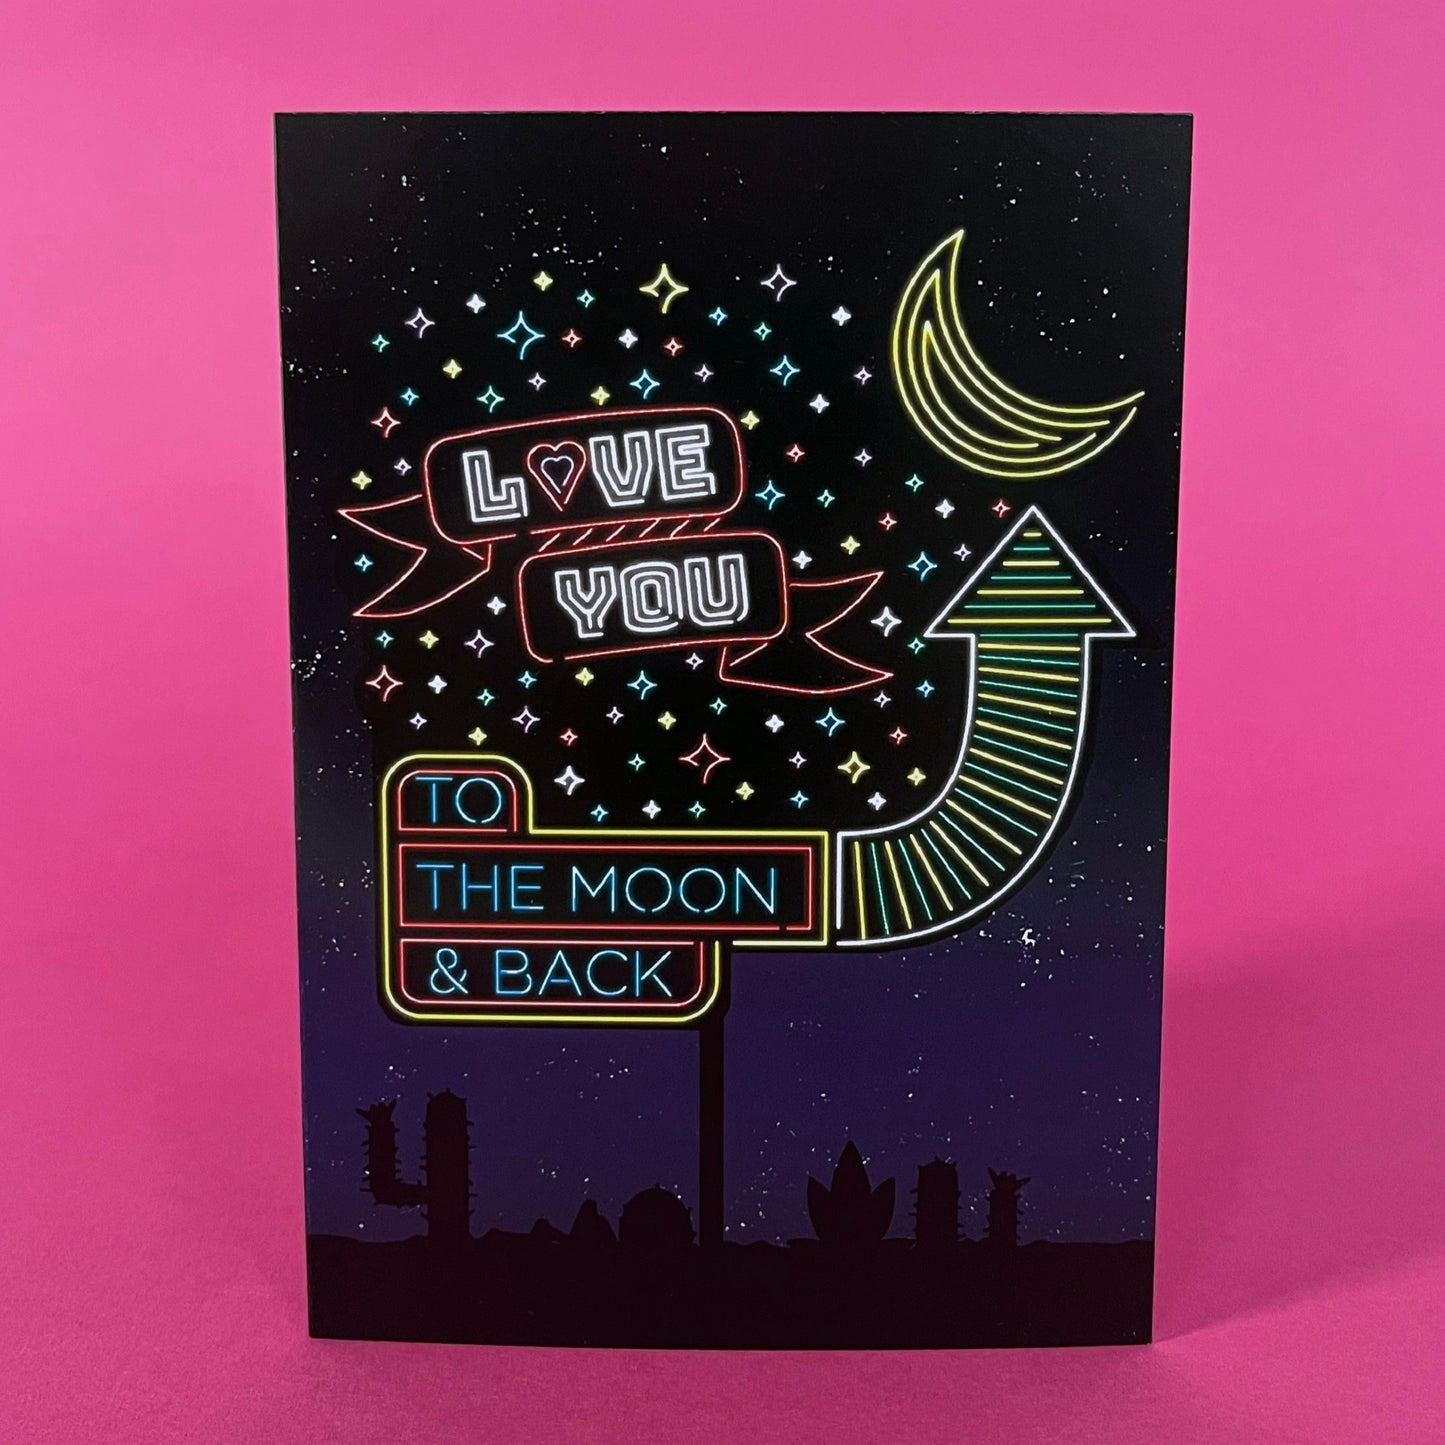 "Love you to the moon & back" card